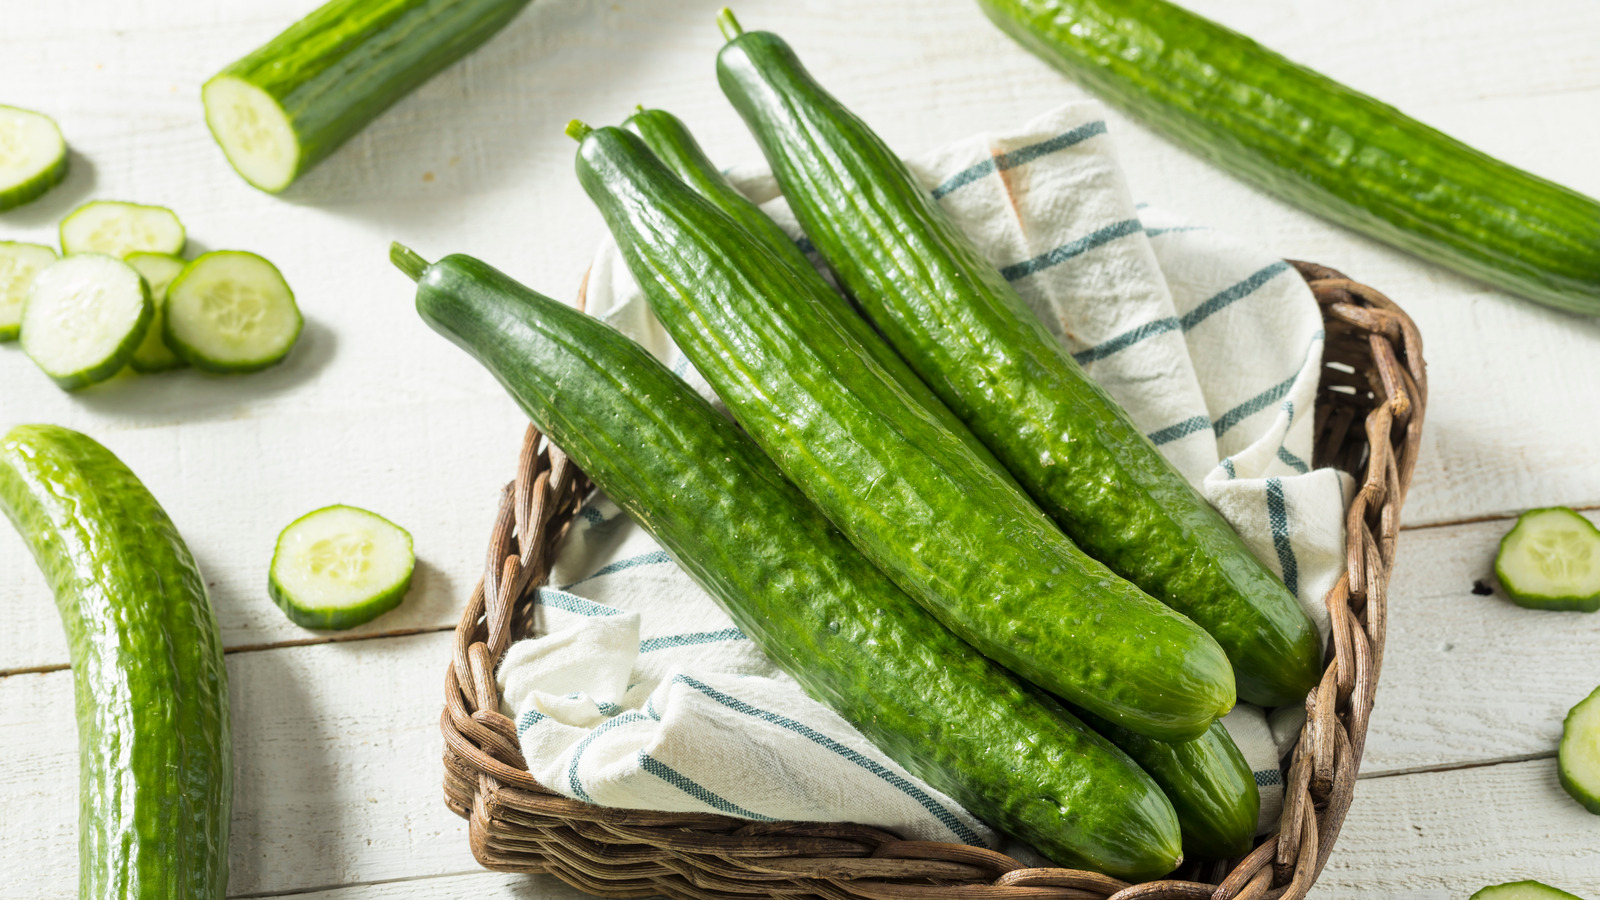 Why Are English Cucumbers Always Wrapped In Plastic?